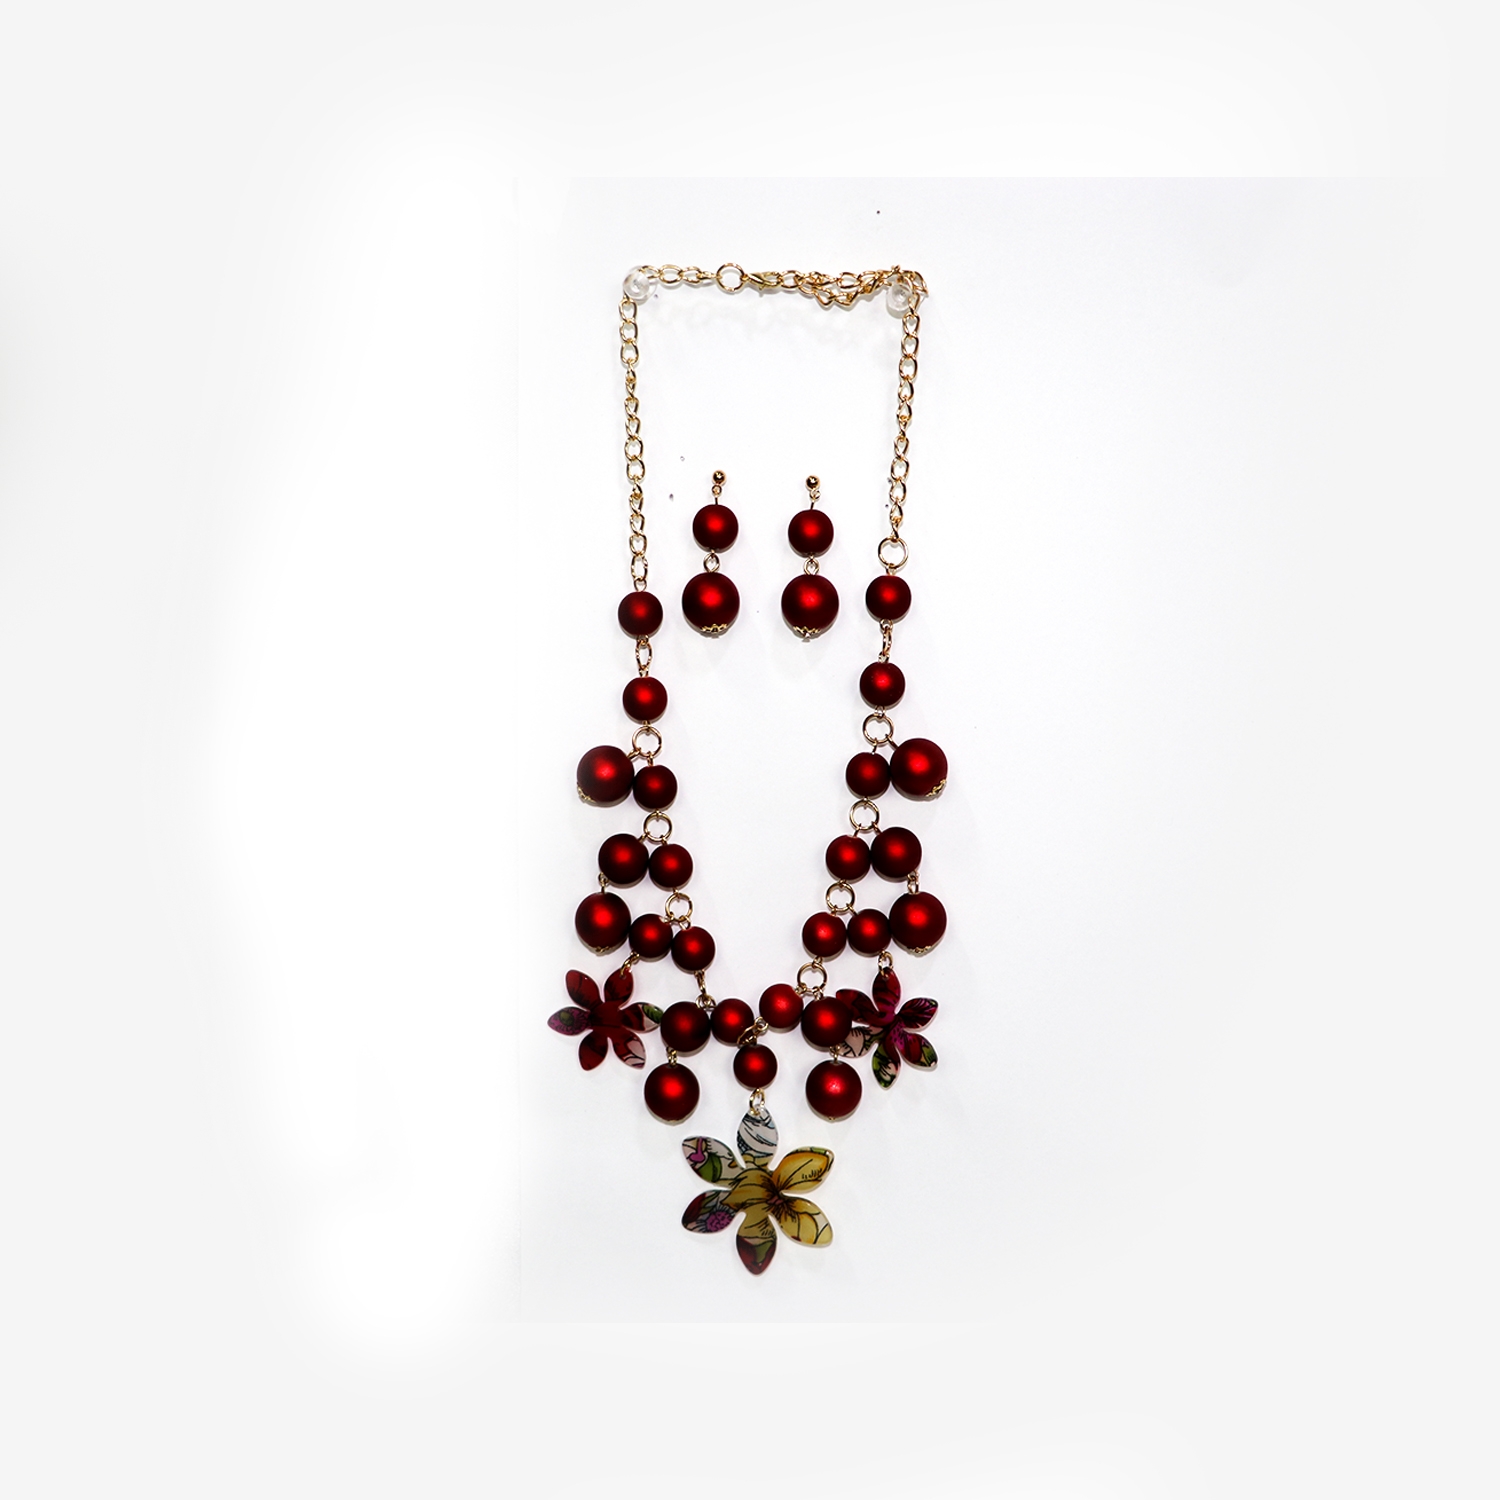 EMM | EMM's Stylish Maroon Necklace For Women And Girls